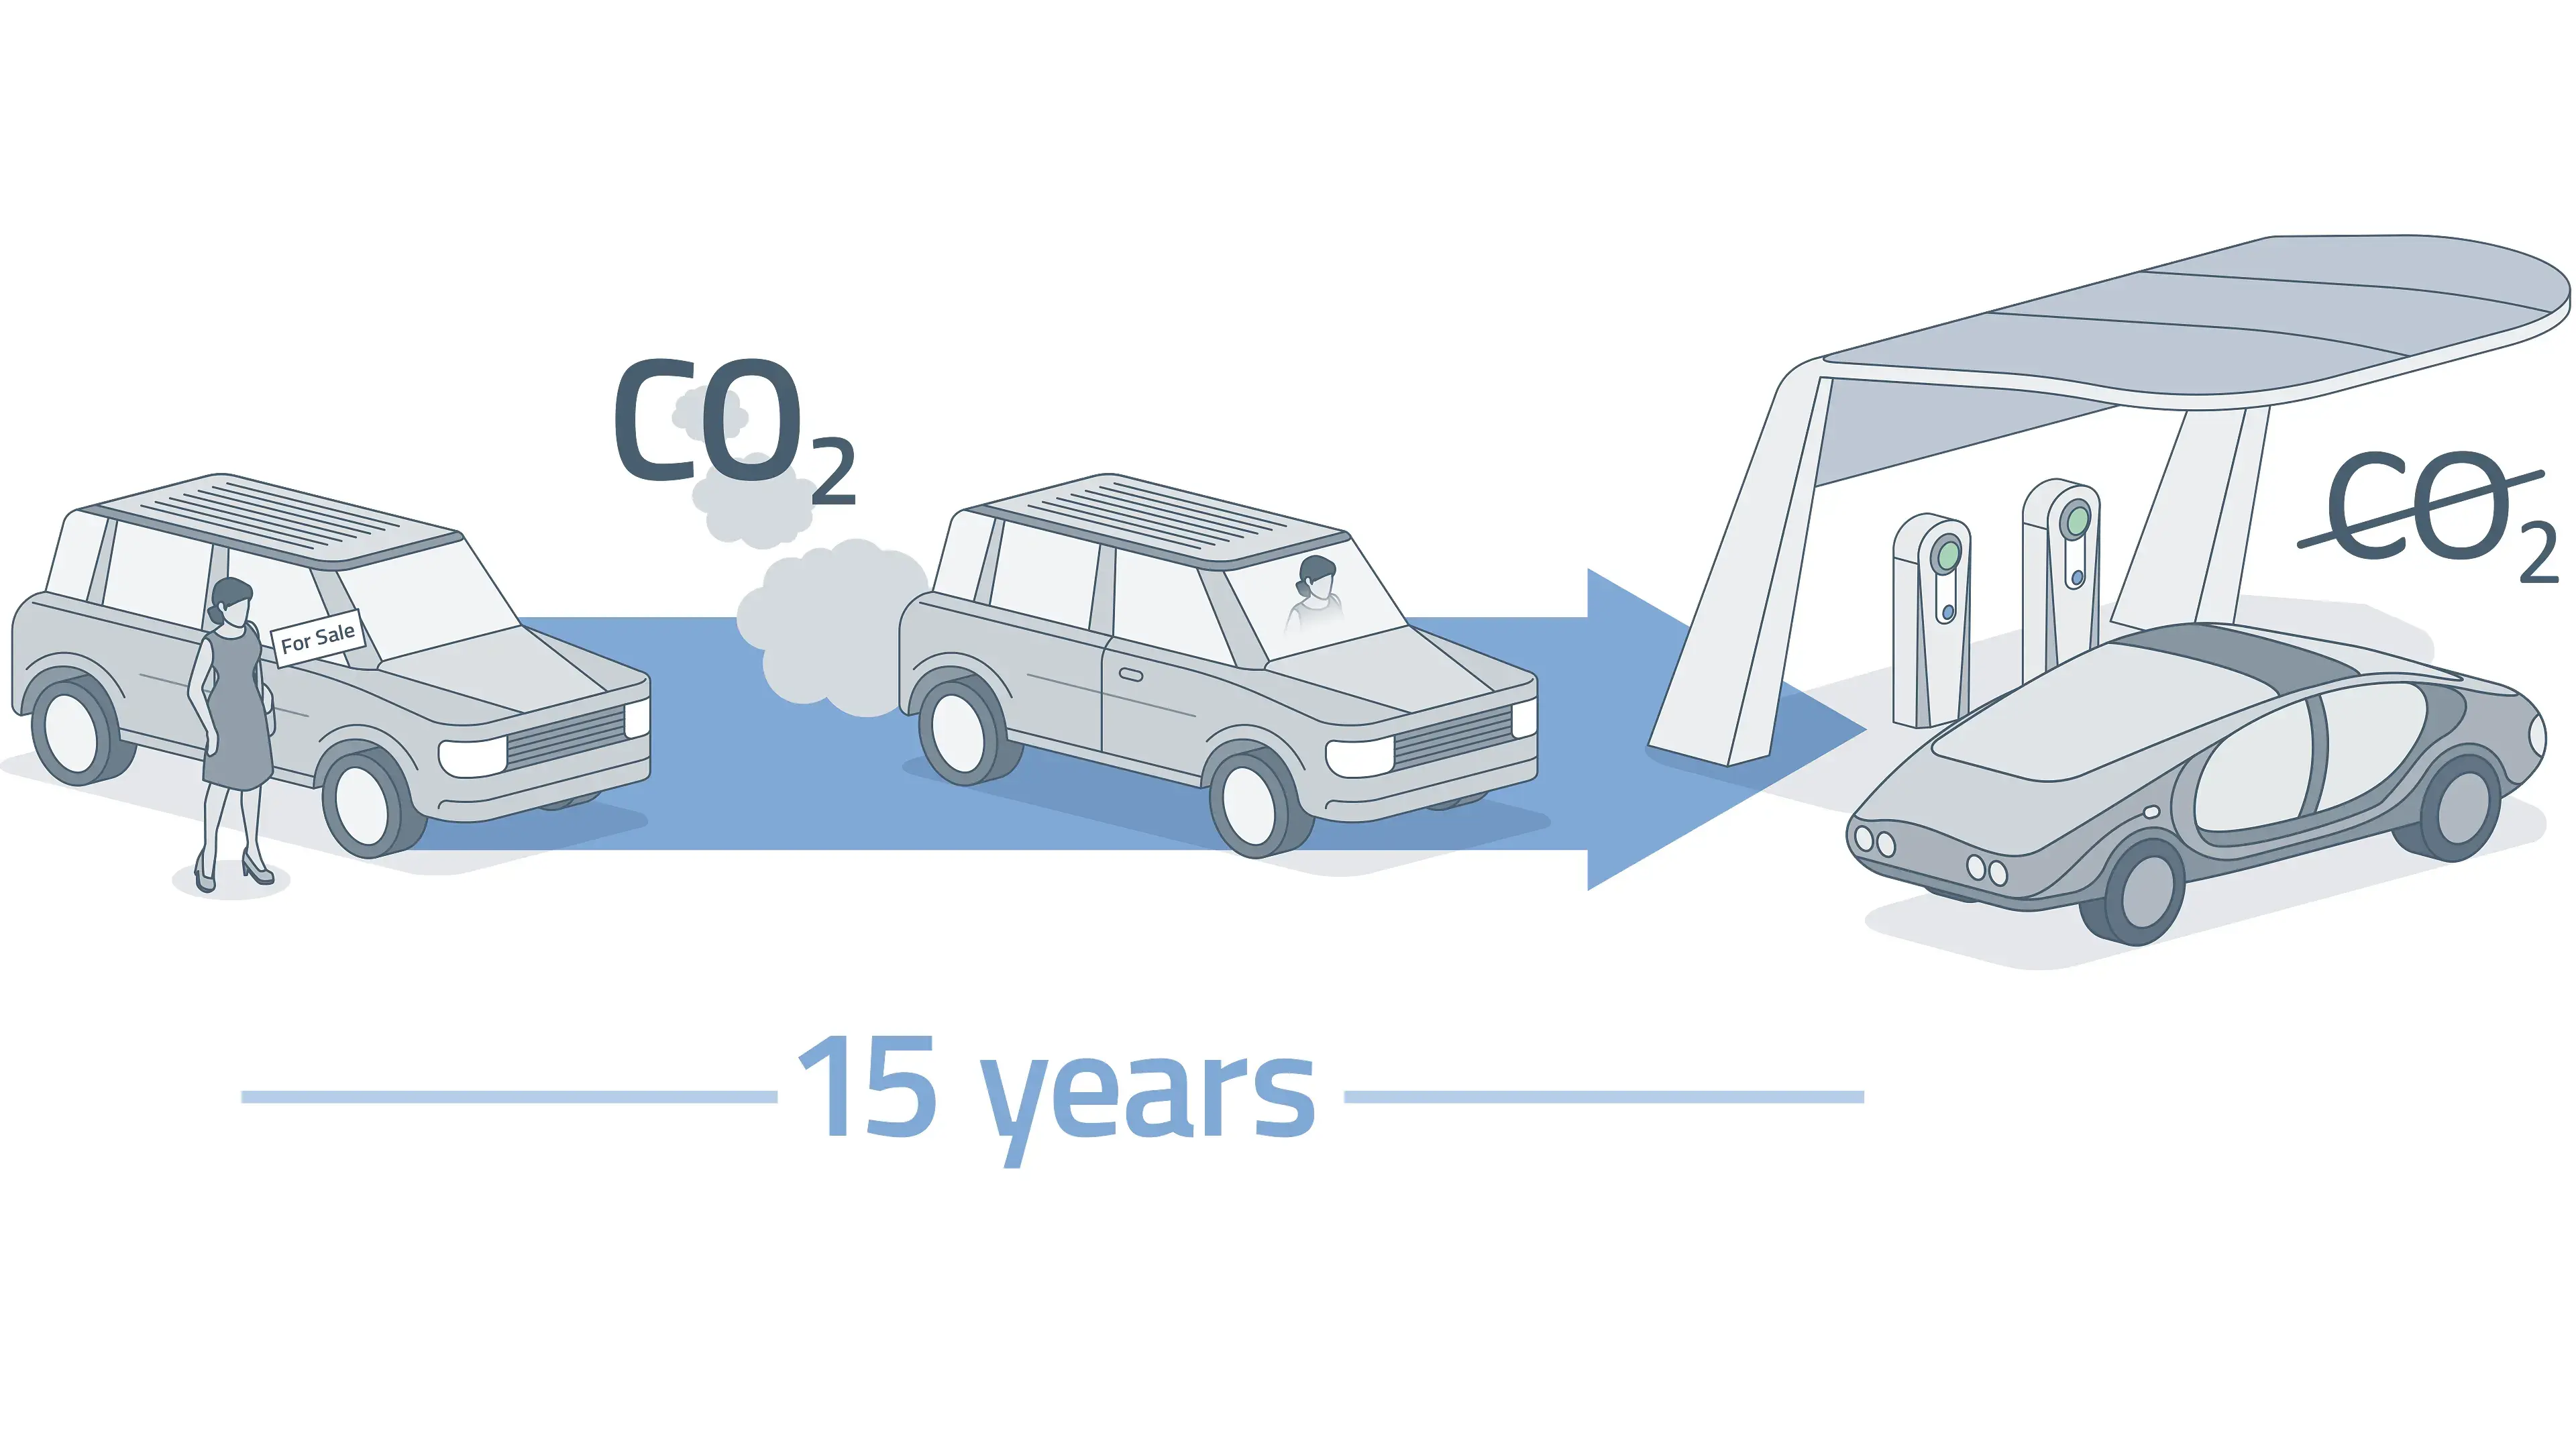 Graphic: CO2 emissions of vehicles with ICE over 15 years of lifetime